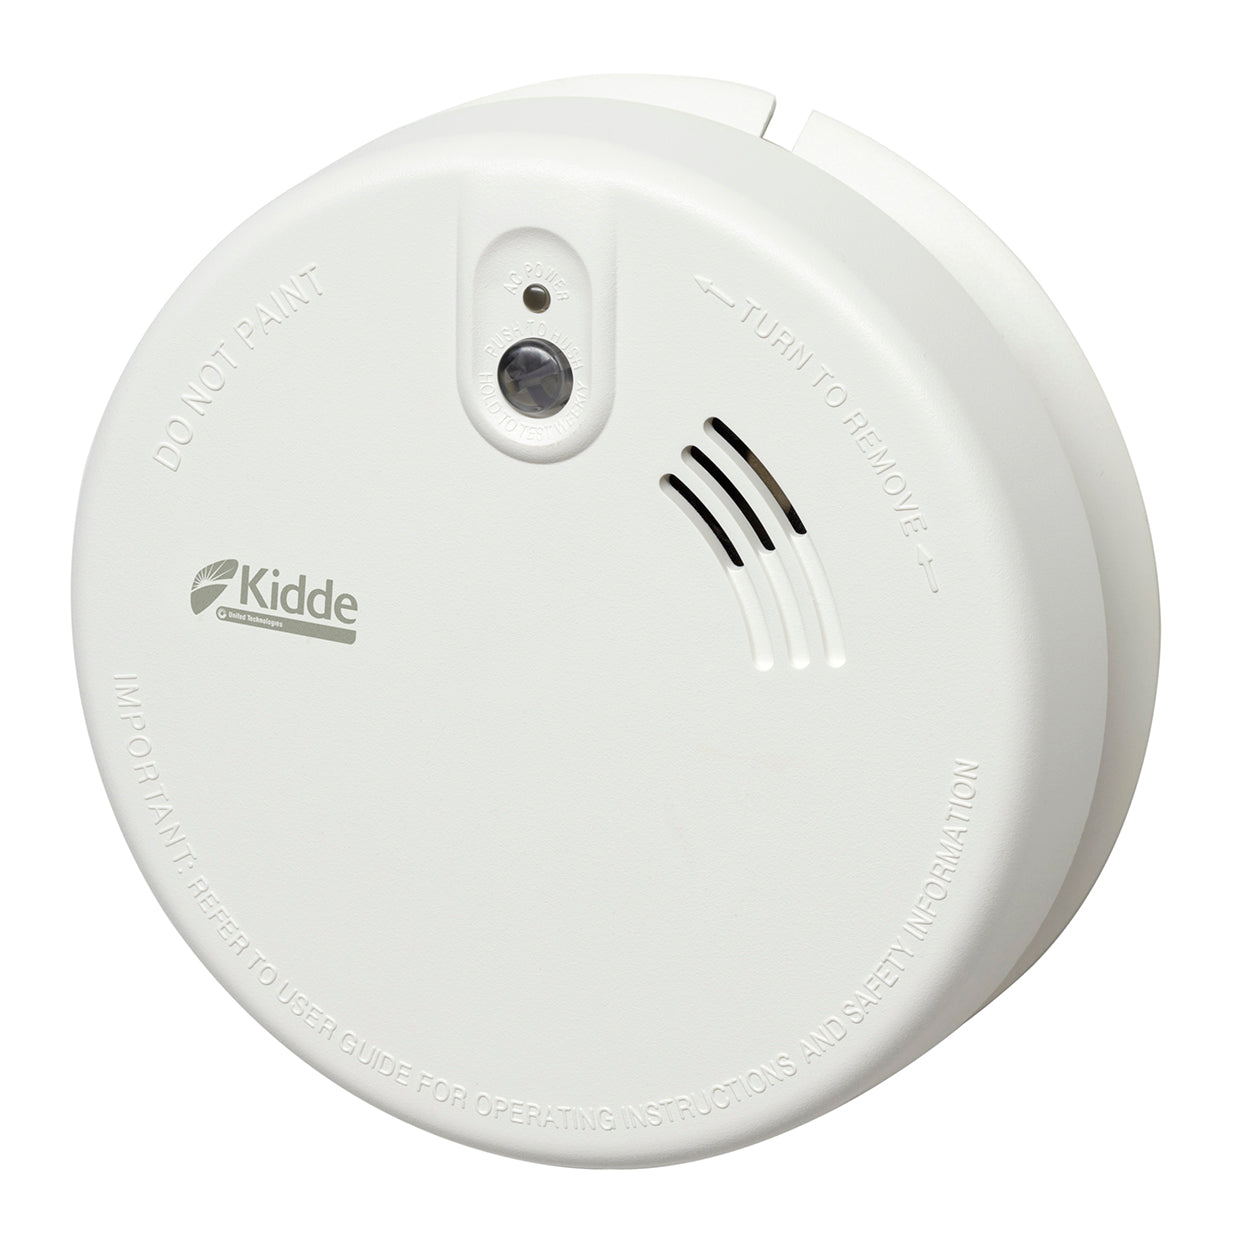 Kidde KF20 Interconnectable Wired Optical Smoke Alarm with Back-up Battery